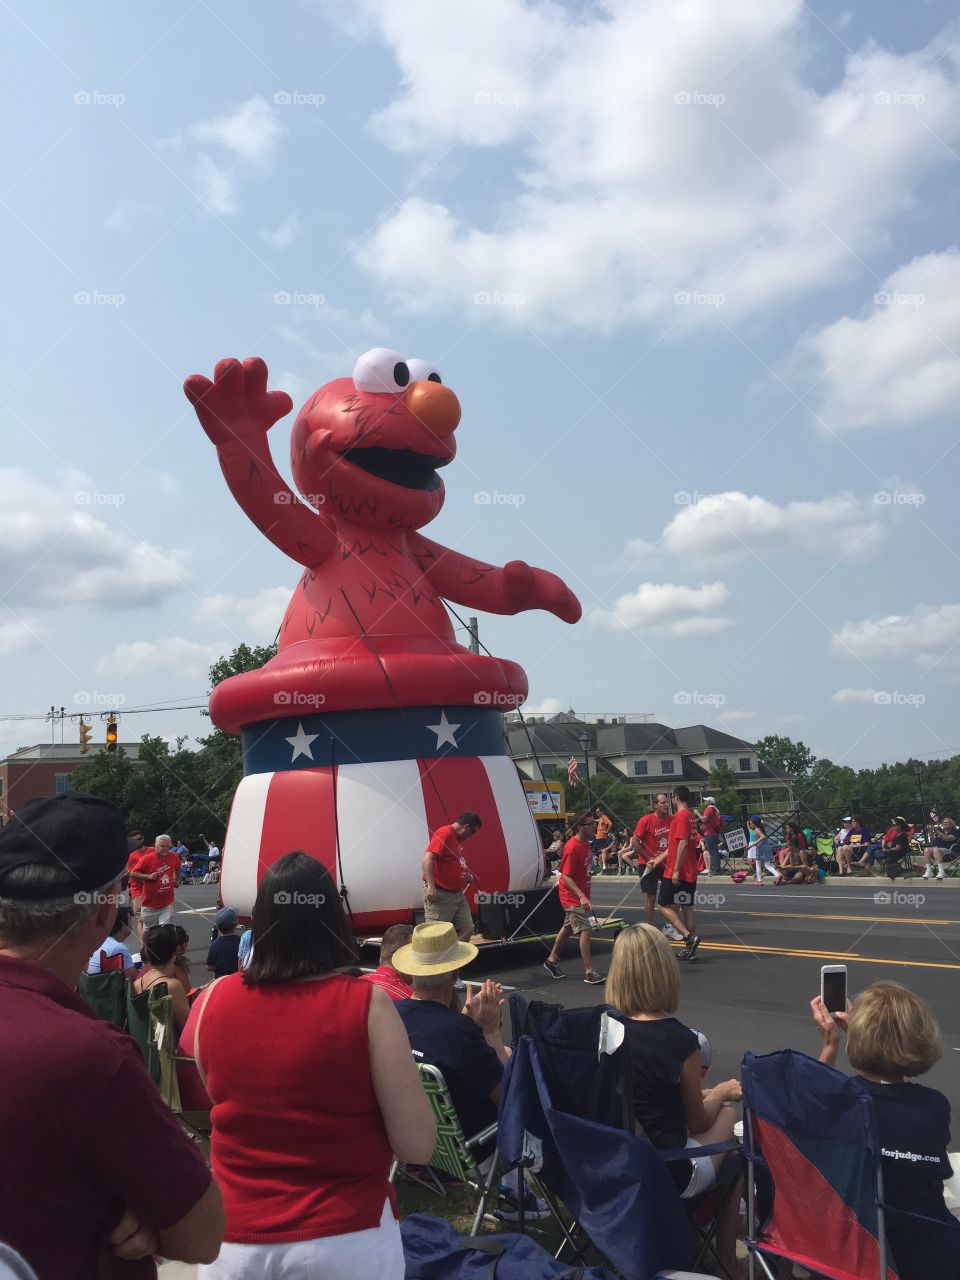 Elmo In A Parade . This is Elmo in 4th of July parade.